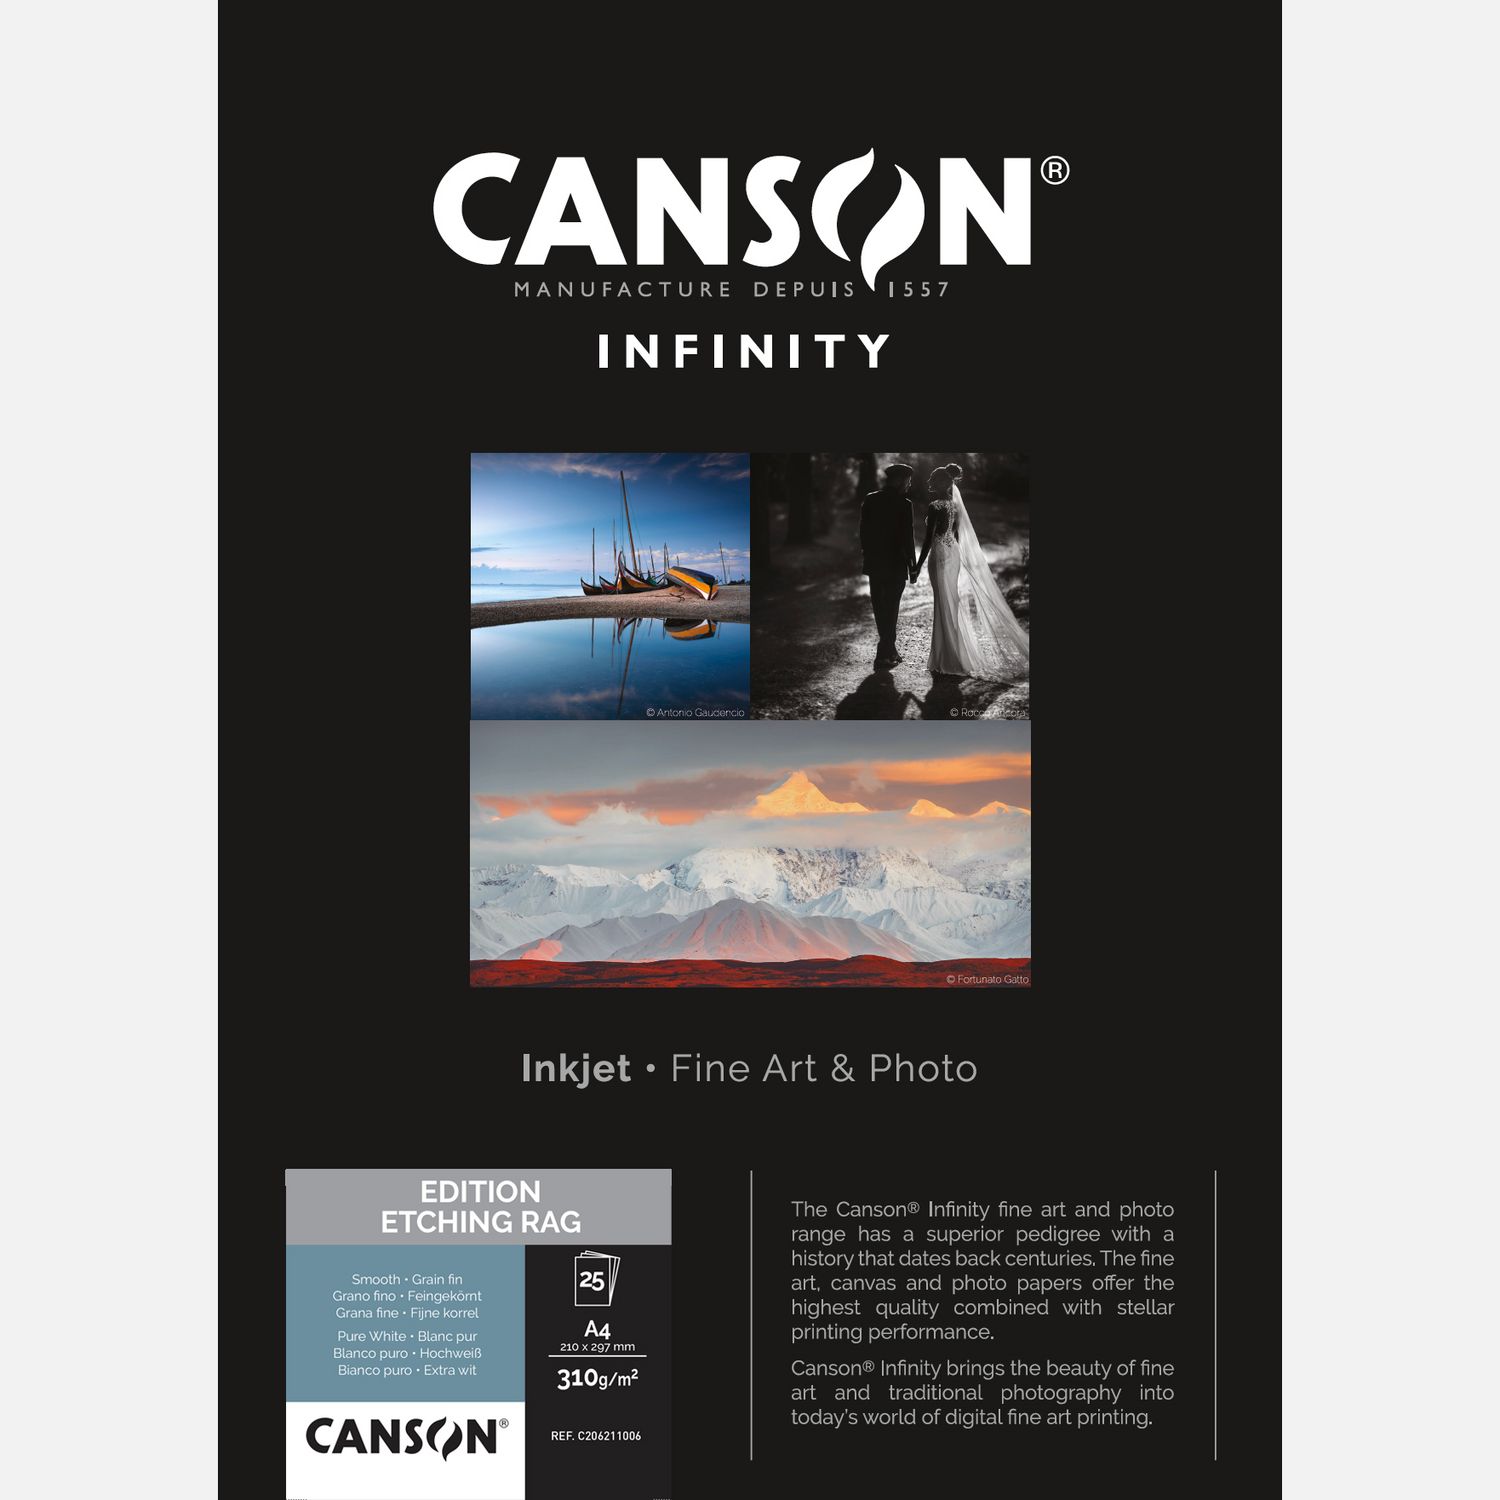 Canson Infinity Edition Etching Rag 310 g/m² A4 - 25 feuilles